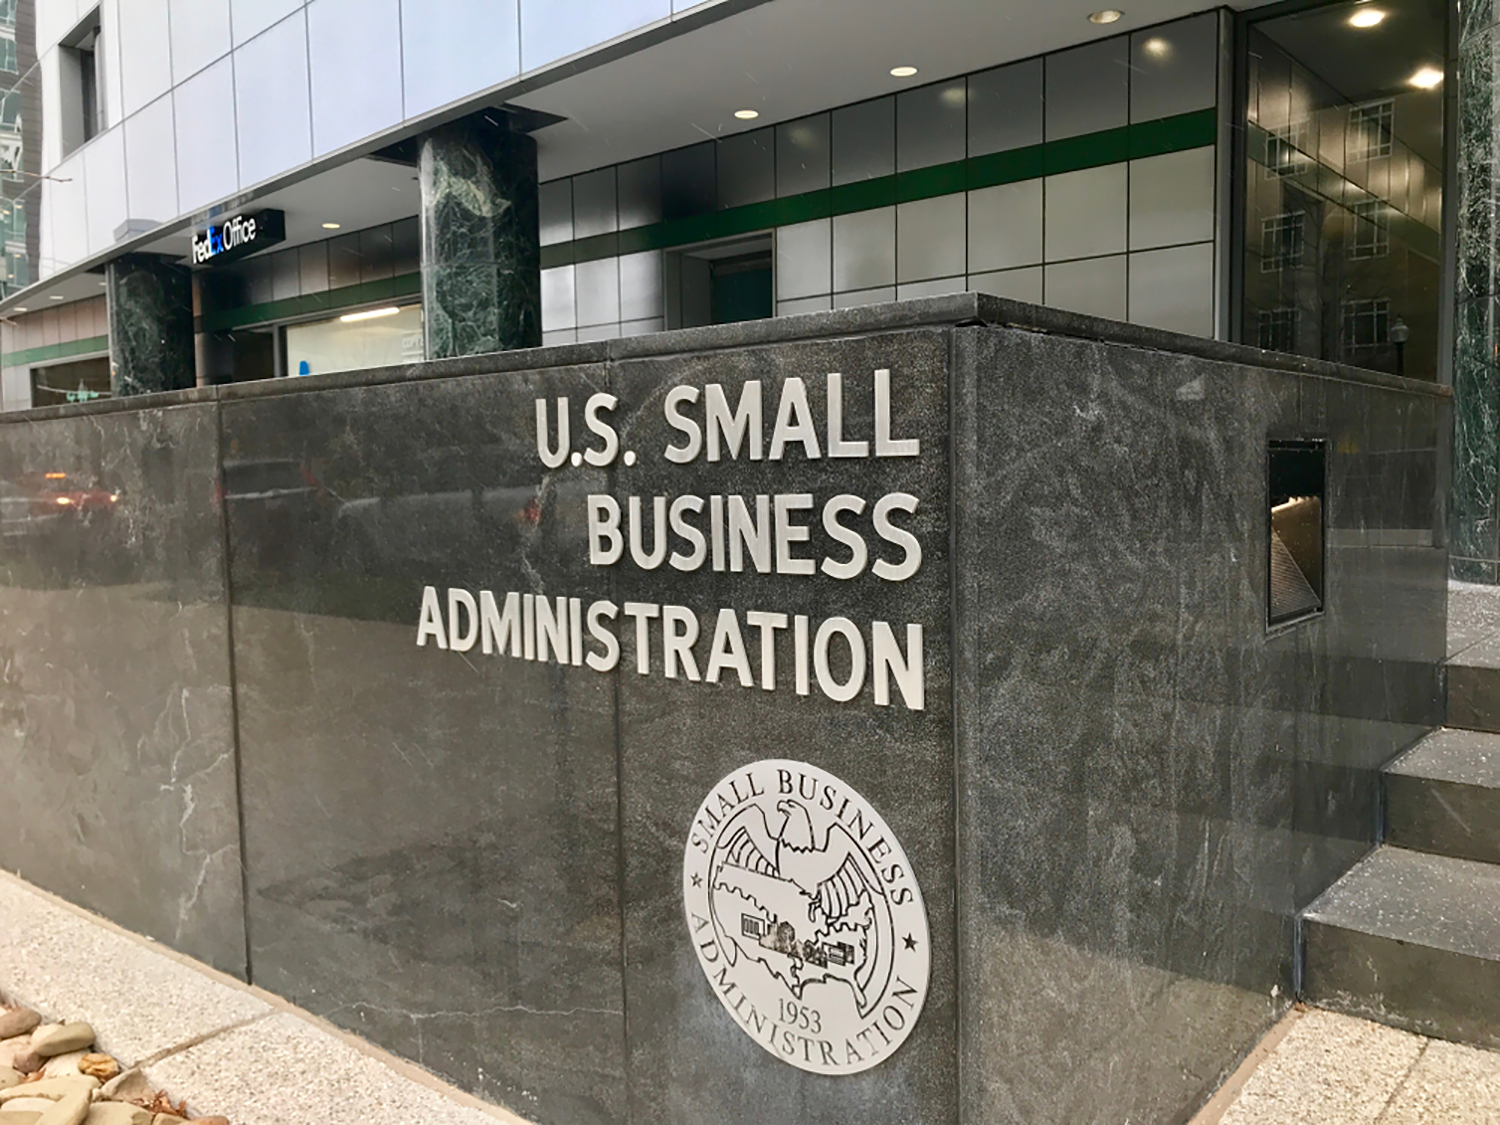 Signage on marble block outside D.C. building